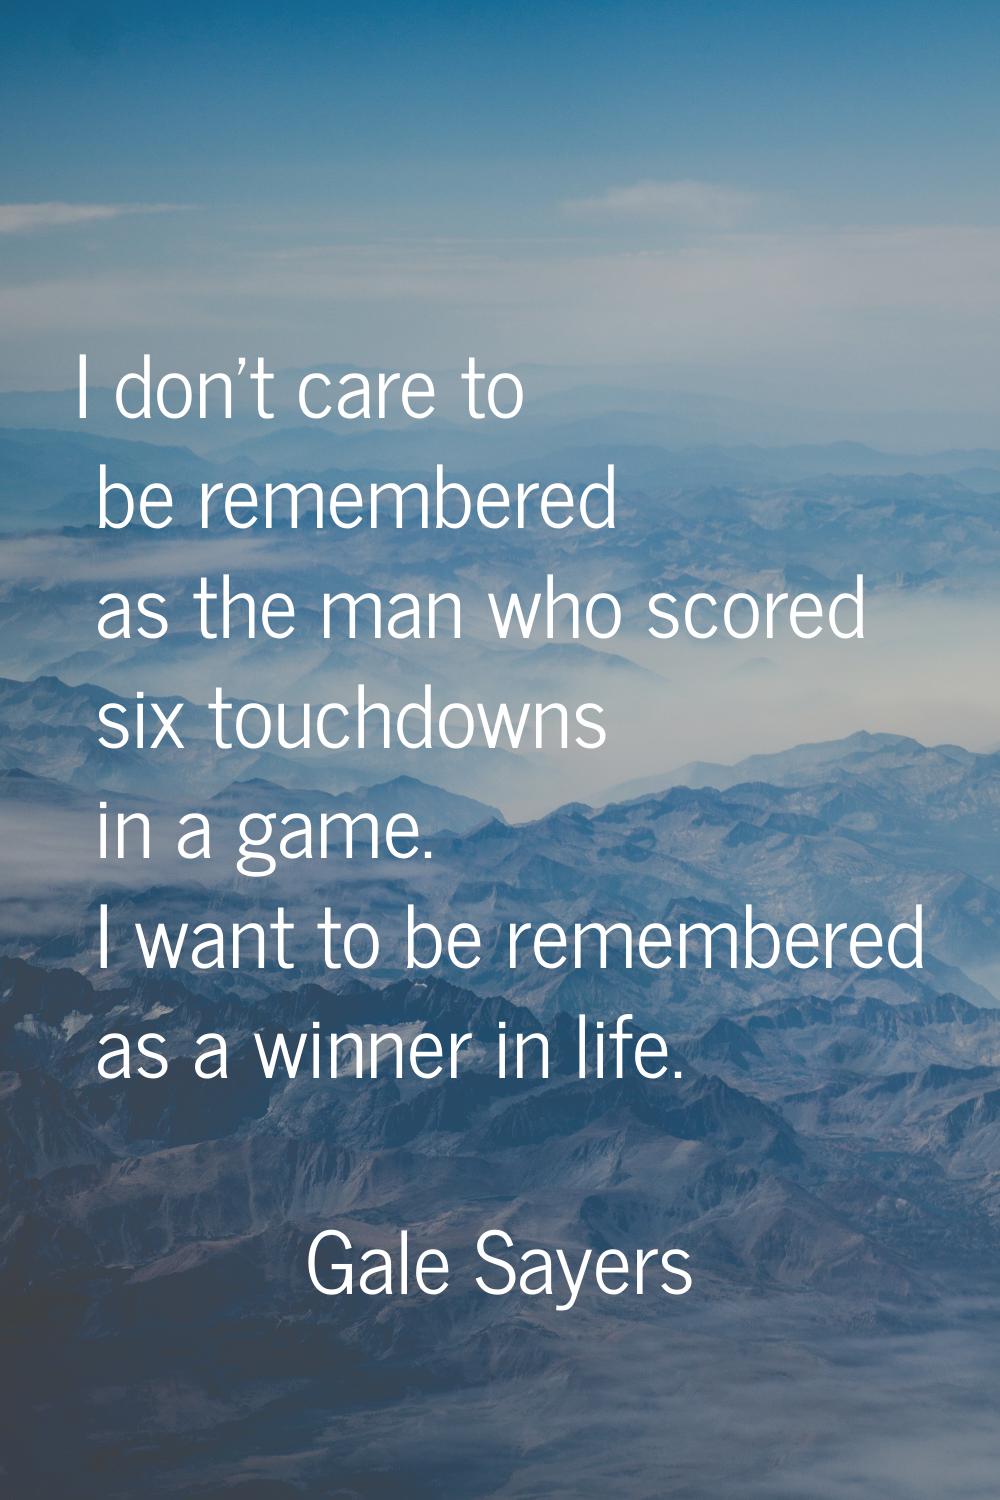 I don't care to be remembered as the man who scored six touchdowns in a game. I want to be remember